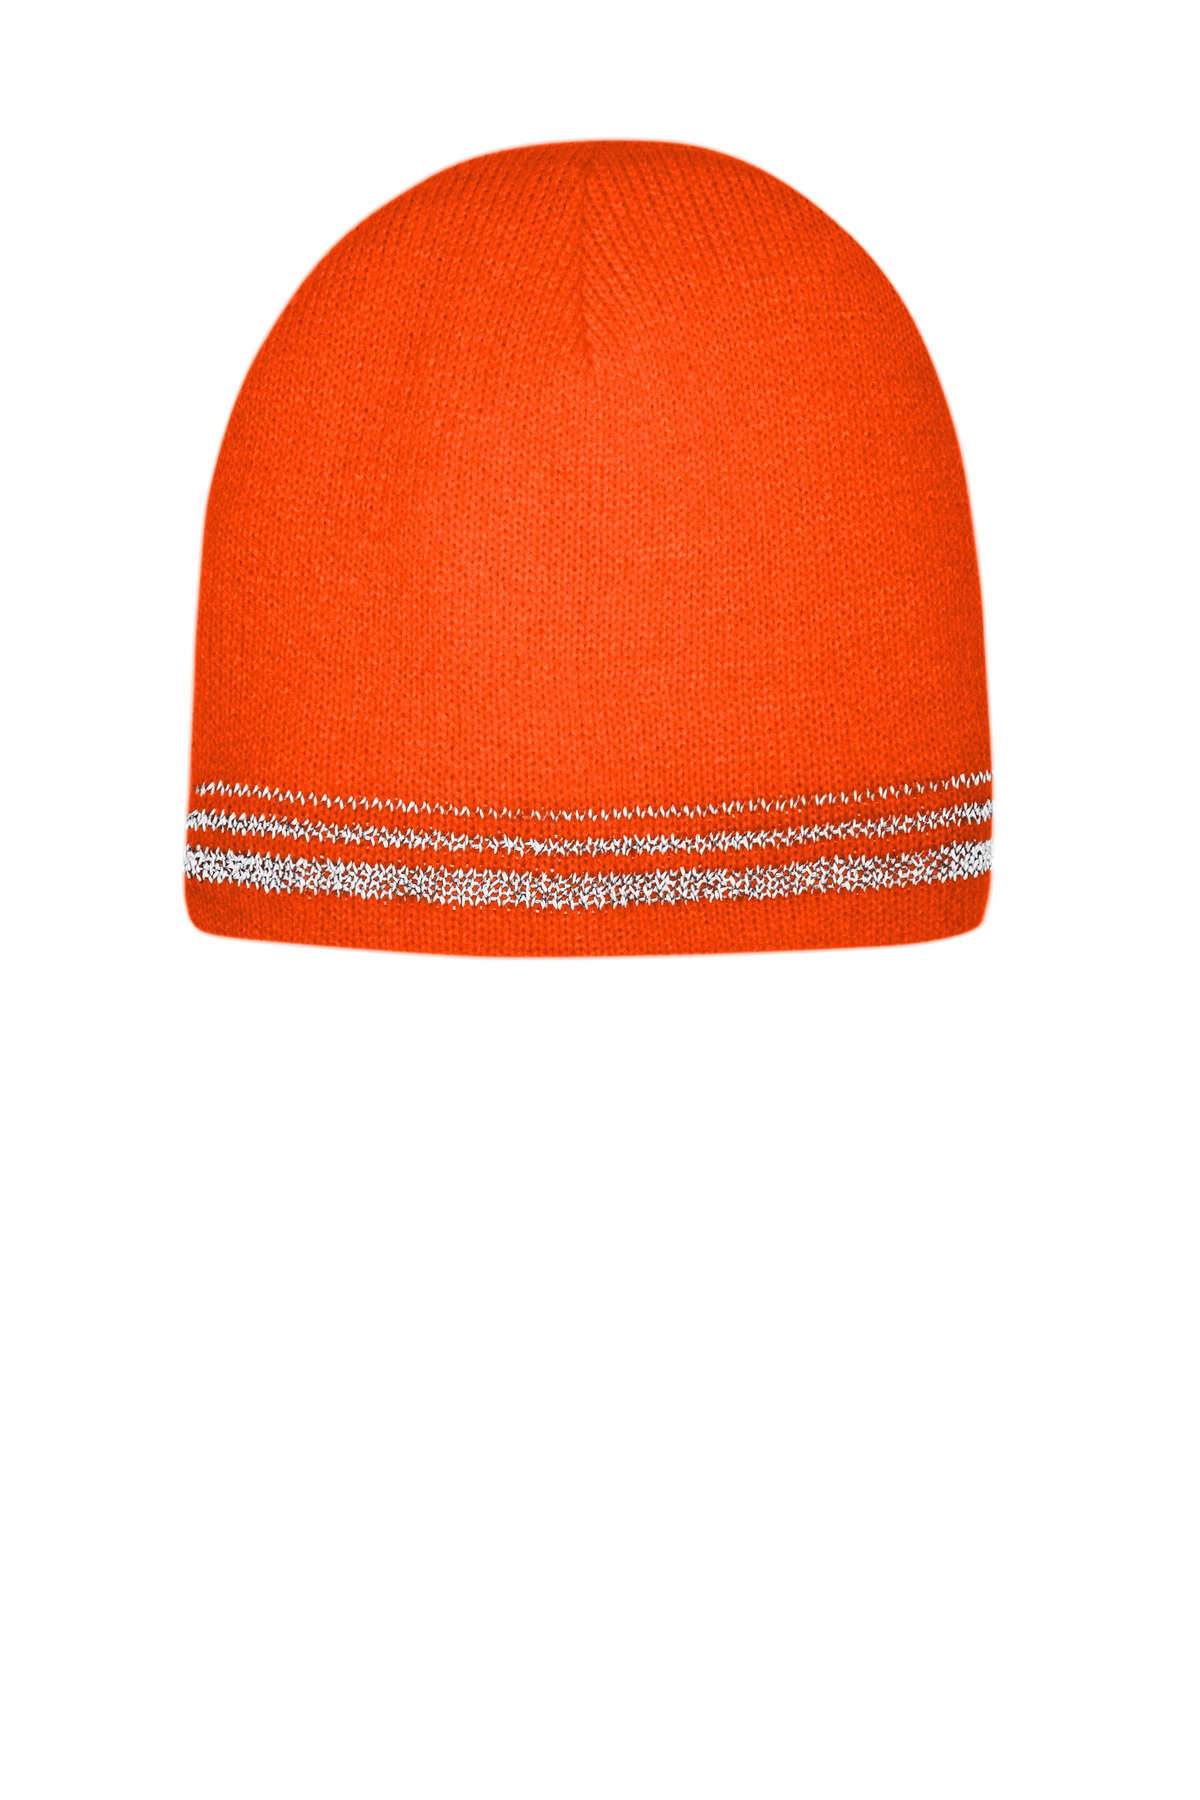 CornerStone® CS804 - Lined Enhanced Visibility with Reflective Stripes Beanie